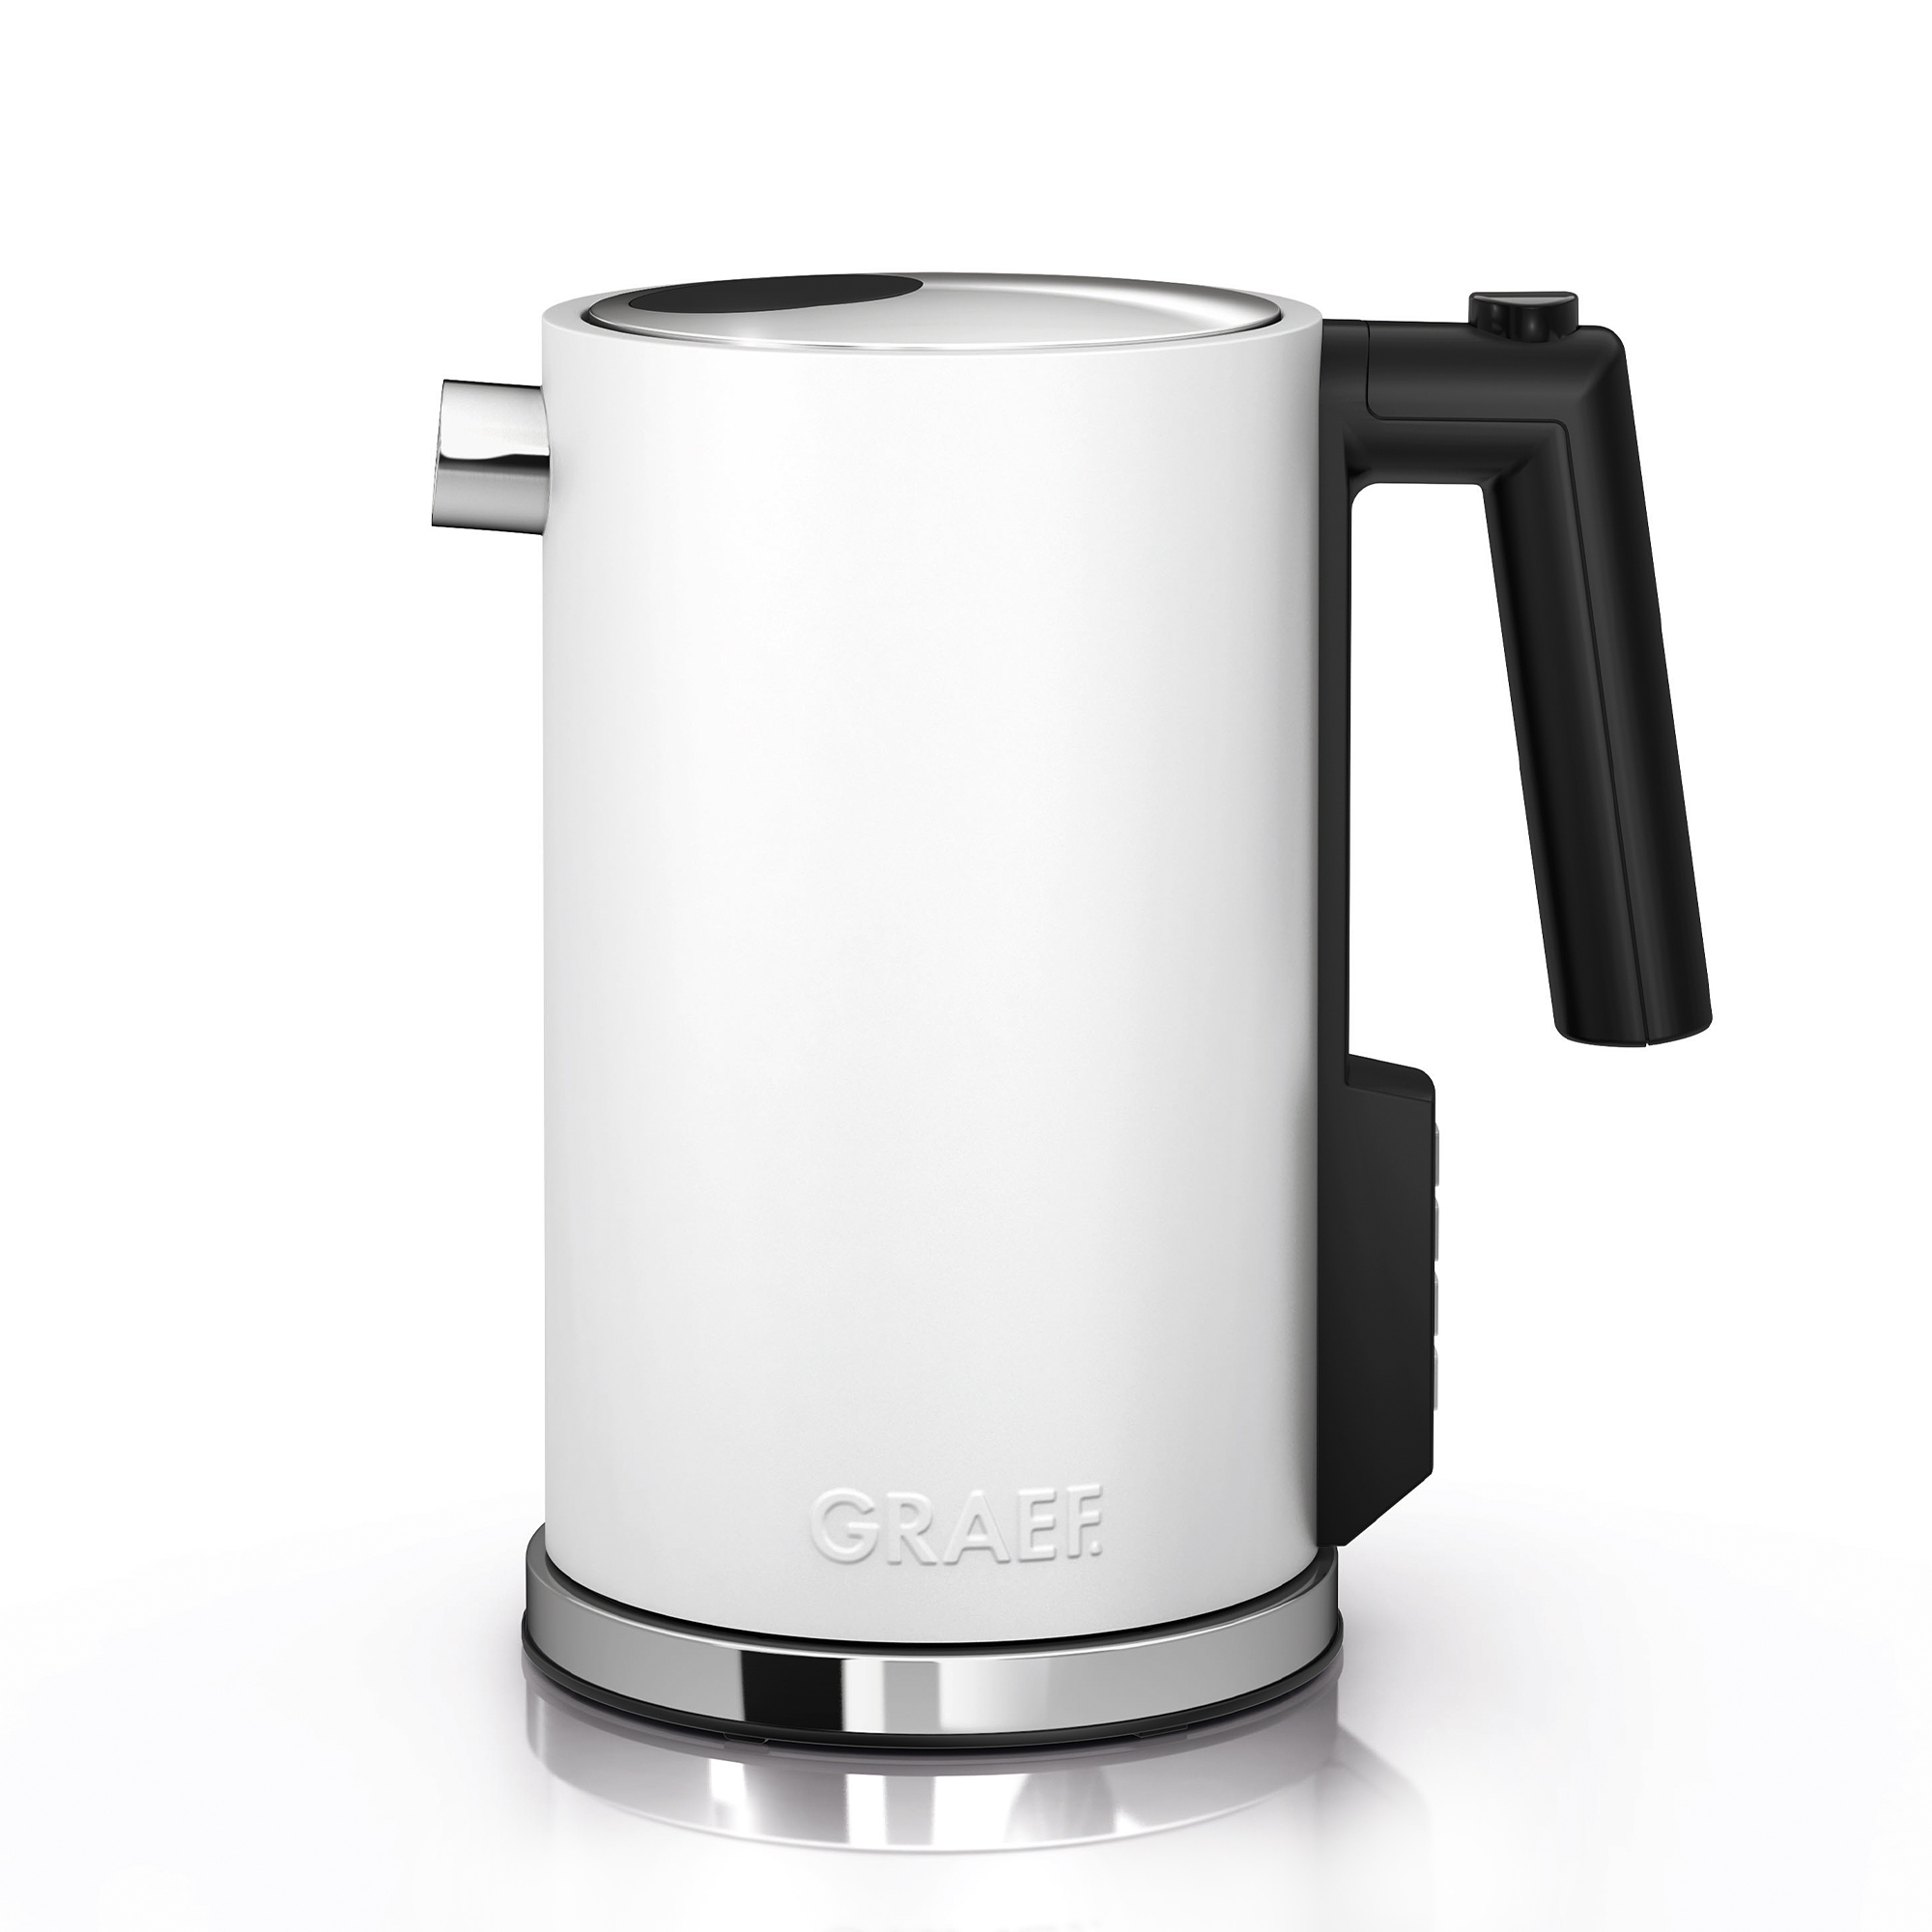 Graef - Stainless Steel Electric Kettle WK 901